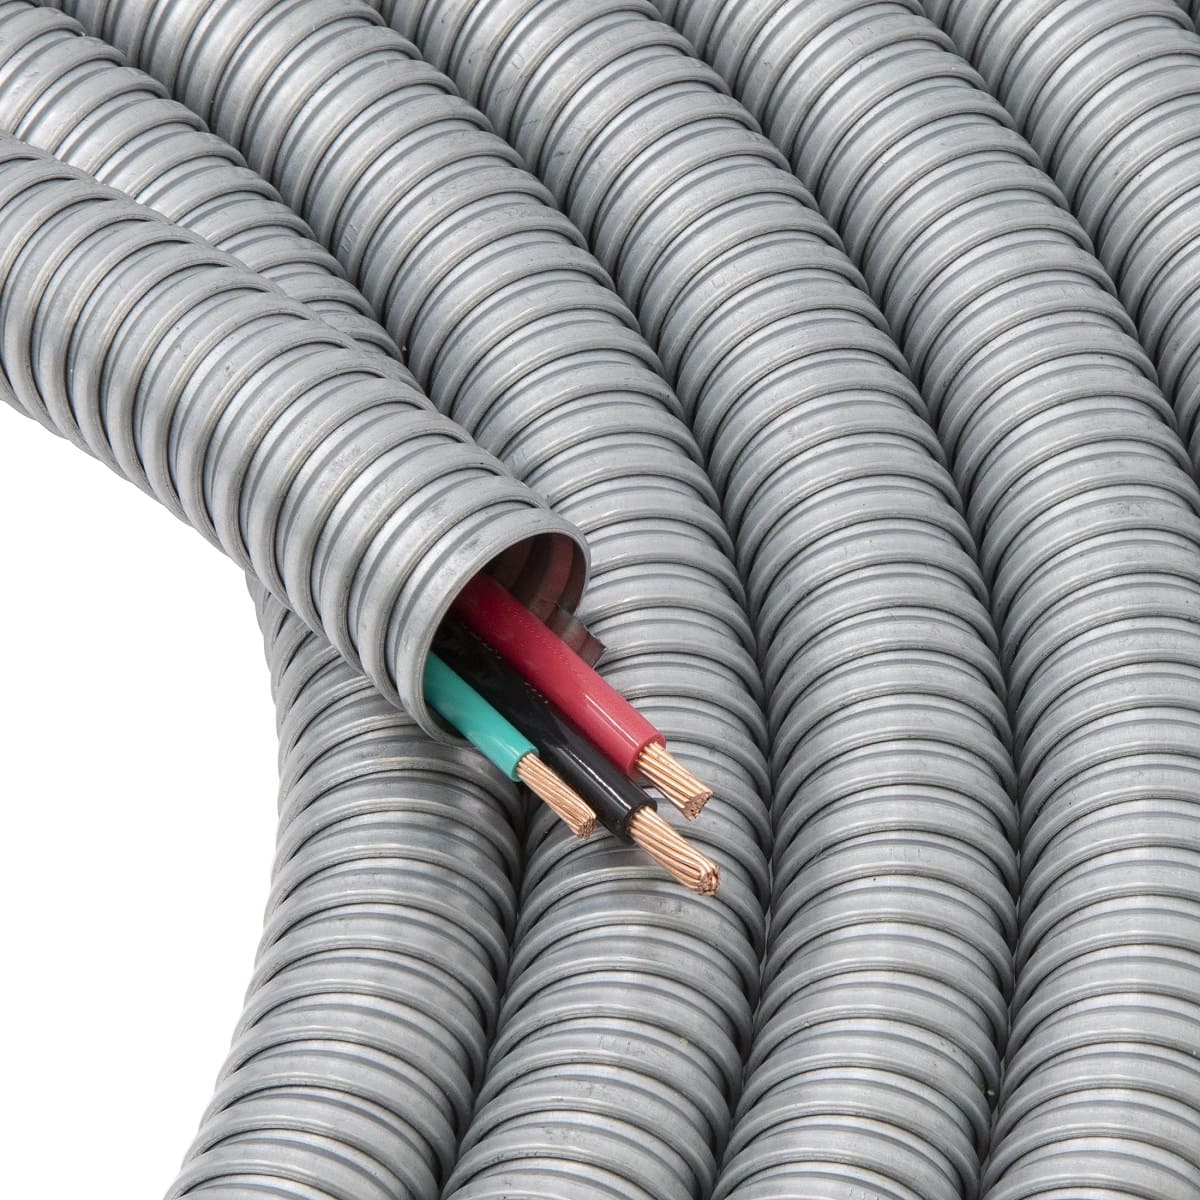 How To Cut Flexible Metal Conduit With Wires Inside